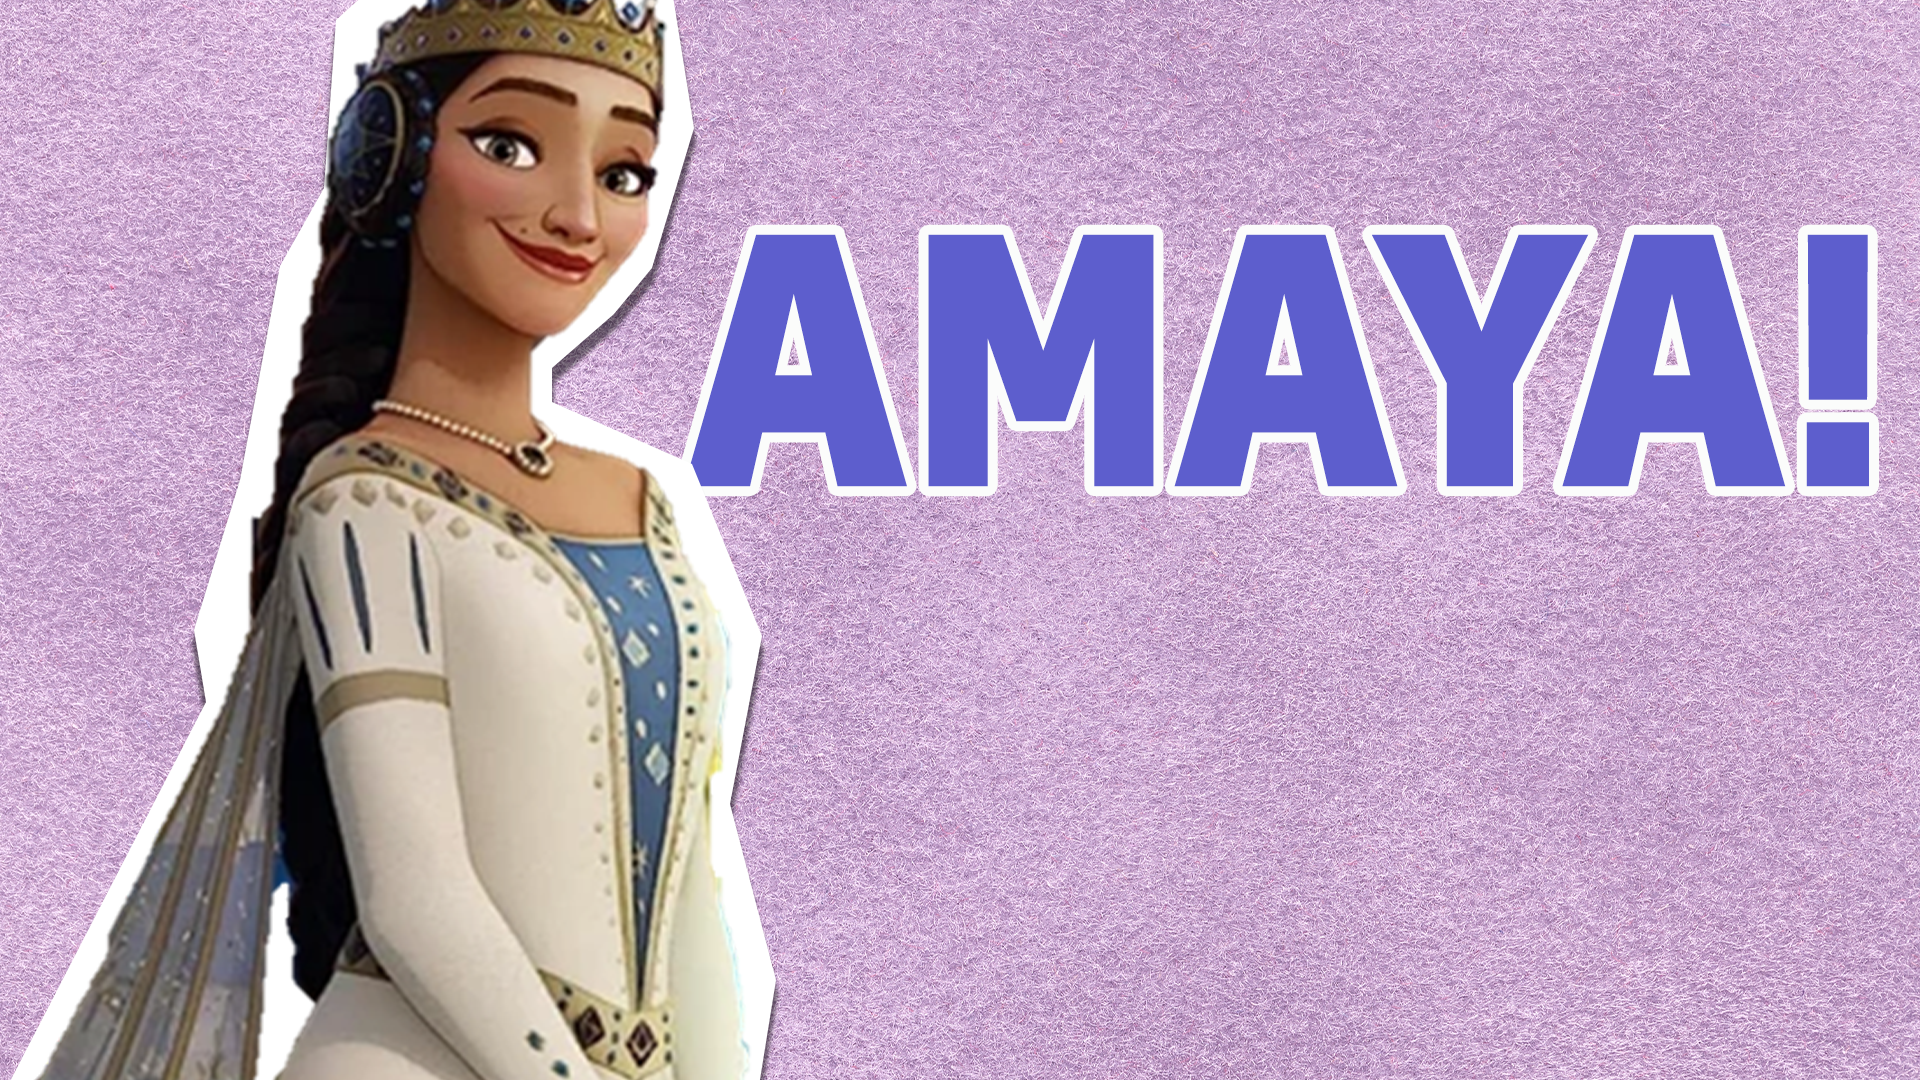 You're Amaya! You're regal, confident and always like helping people less fortunate than yourself!